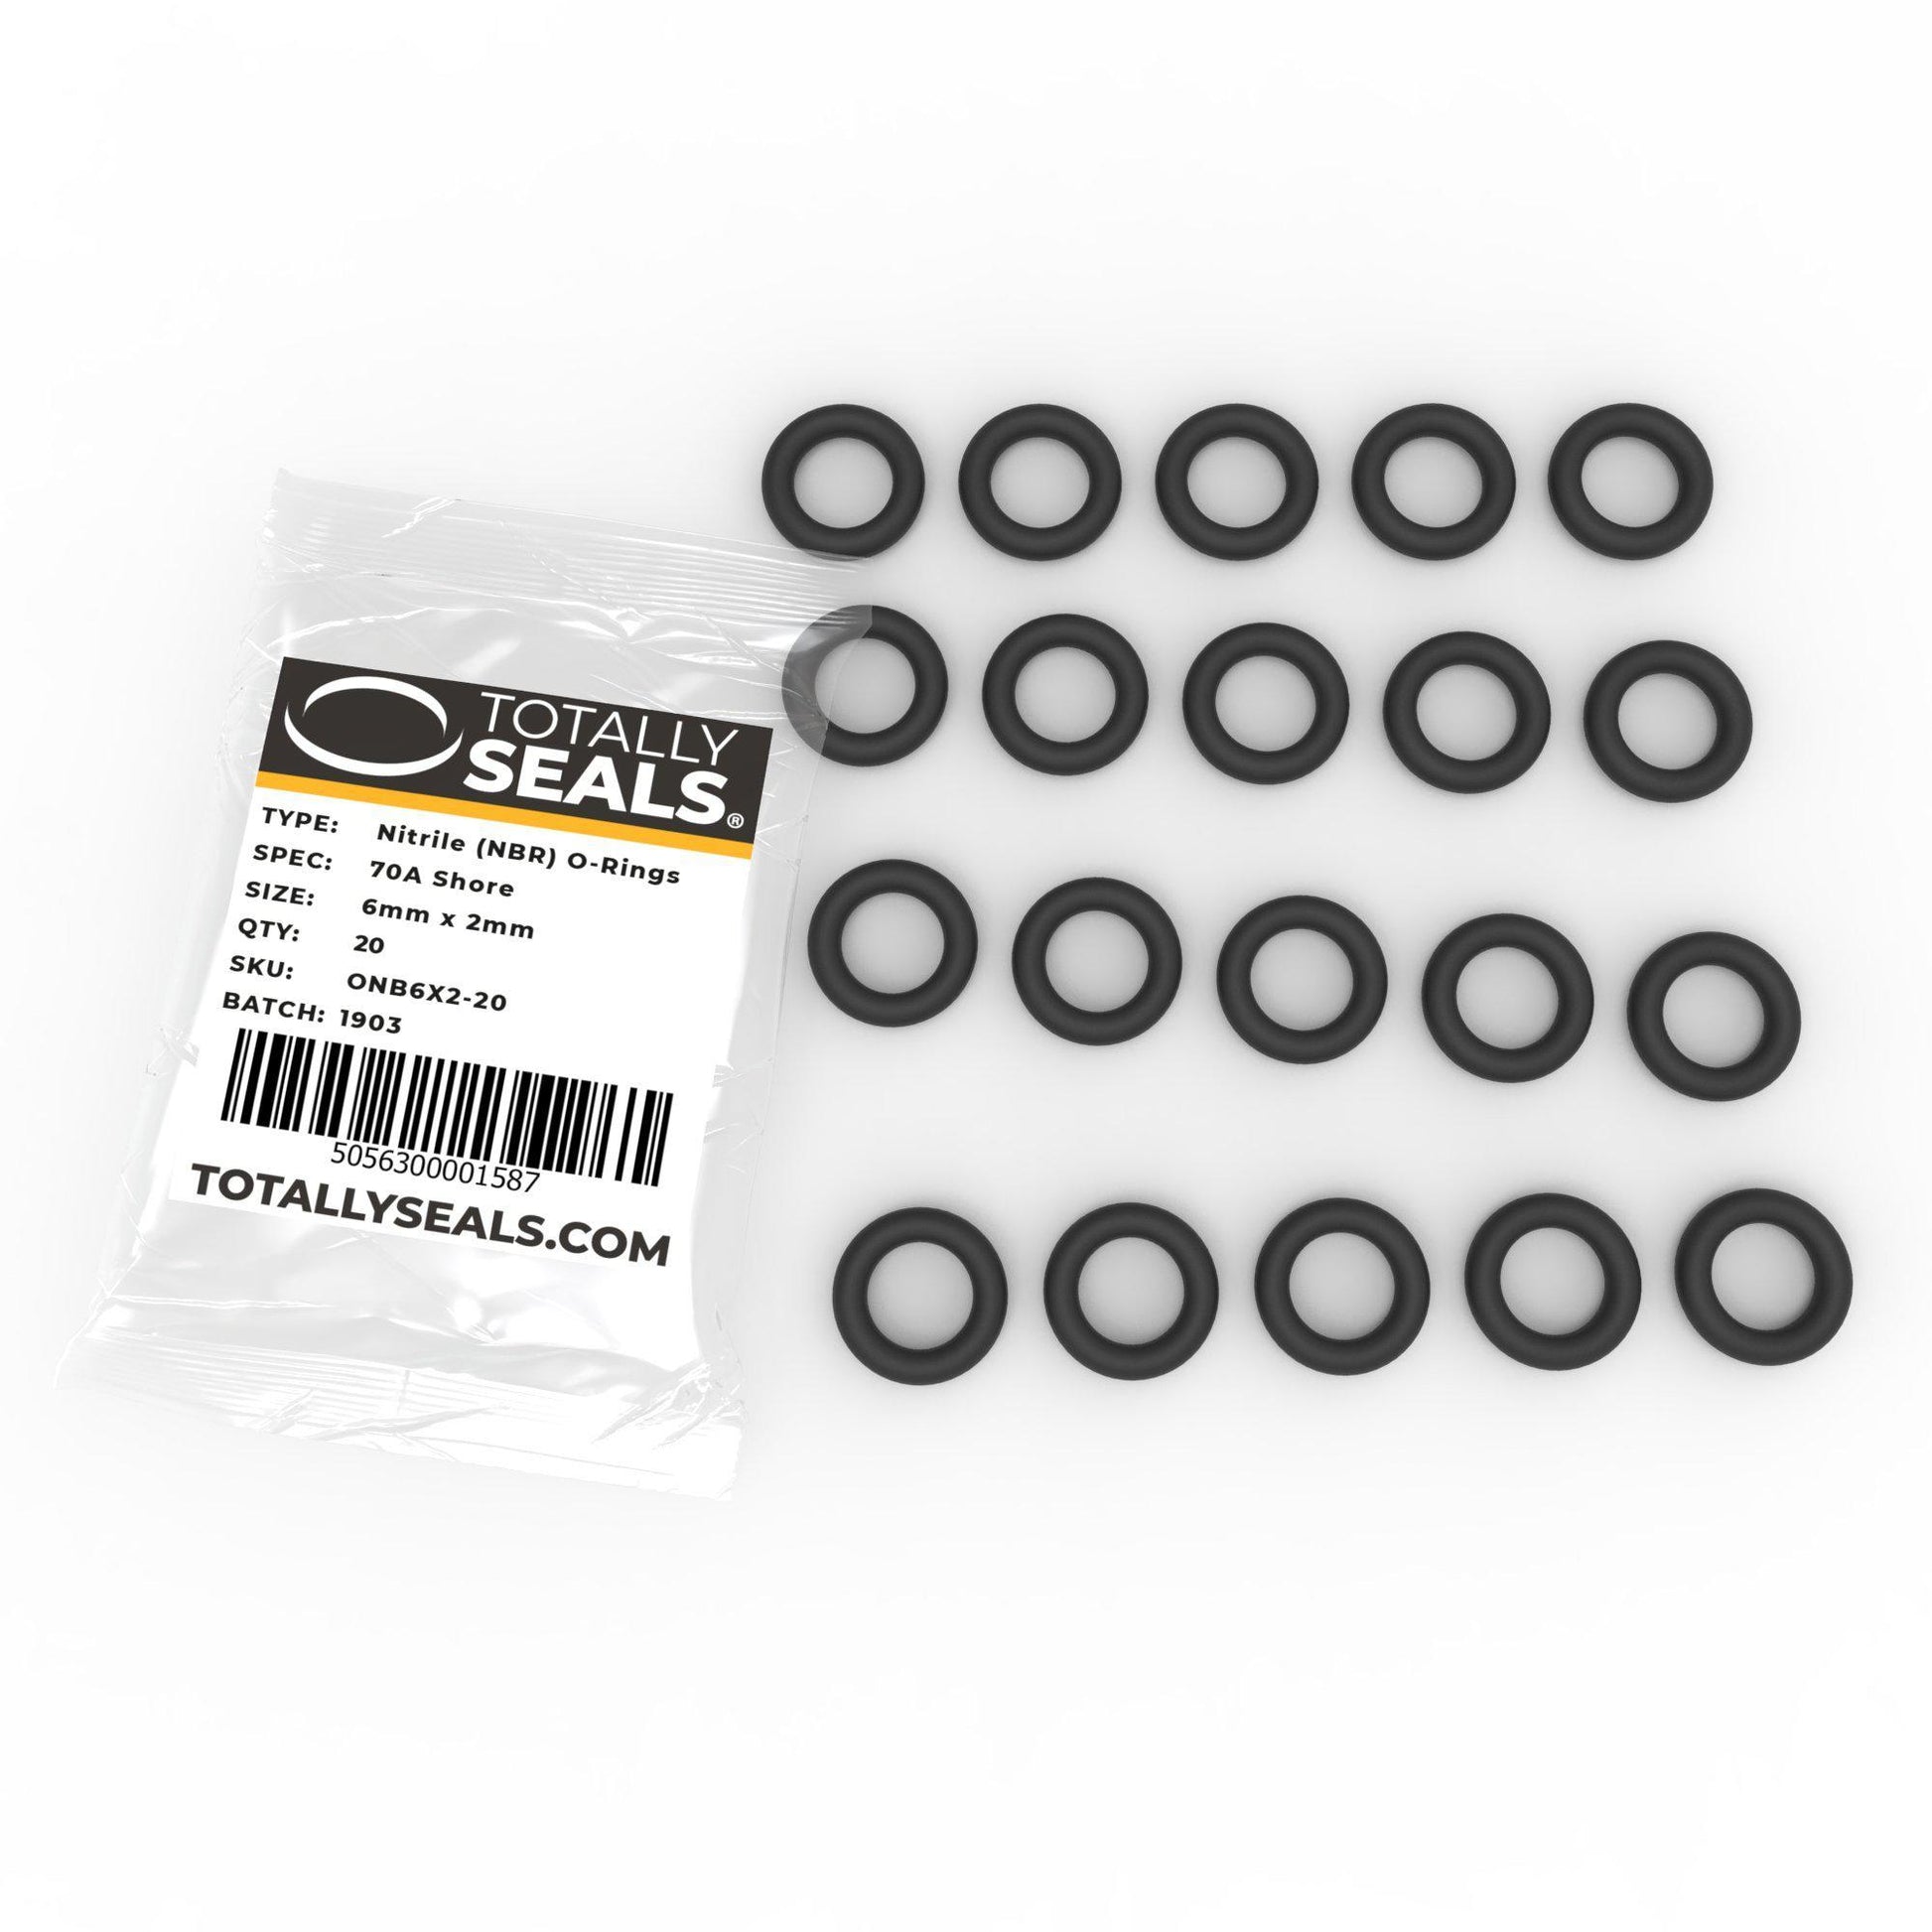 6mm x 2mm (10mm OD) Nitrile O-Rings - Totally Seals®